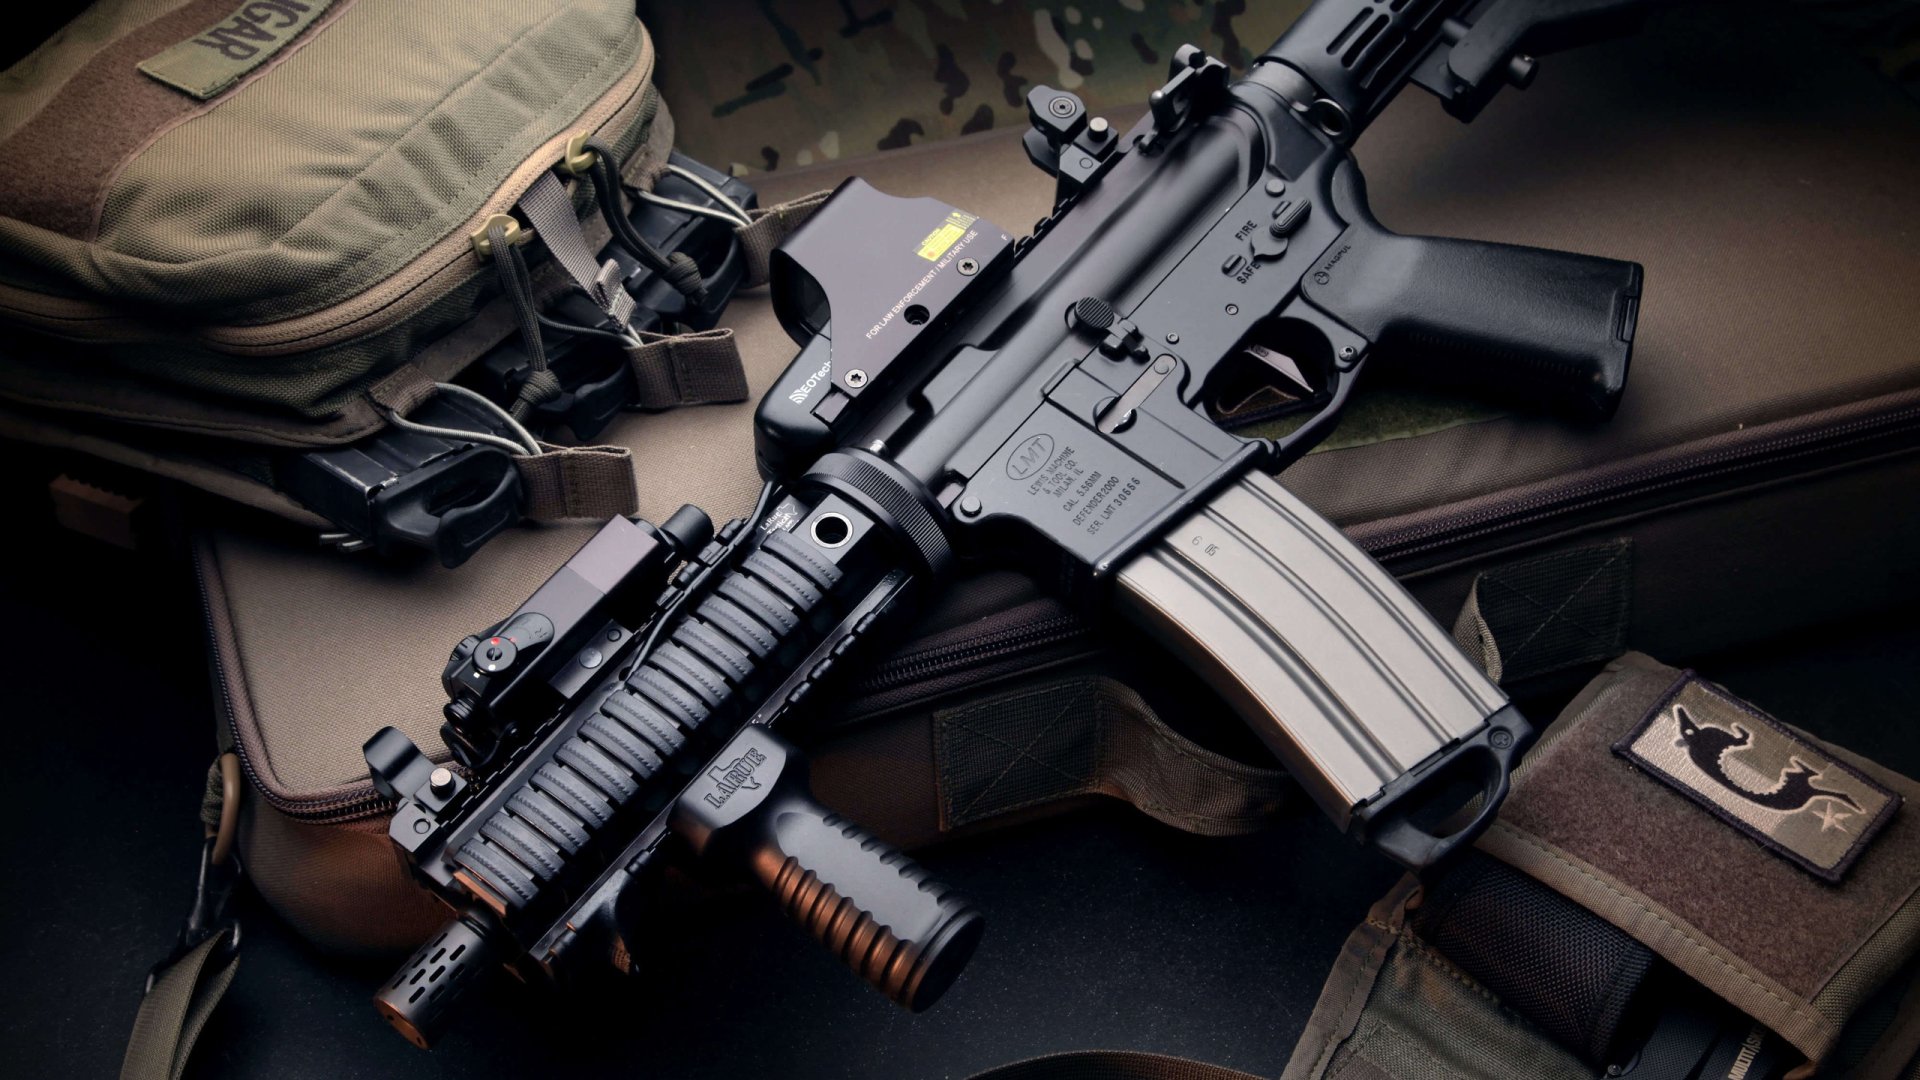 3 M4 Carbine Hd Wallpapers Background Images Wallpaper Abyss Images, Photos, Reviews